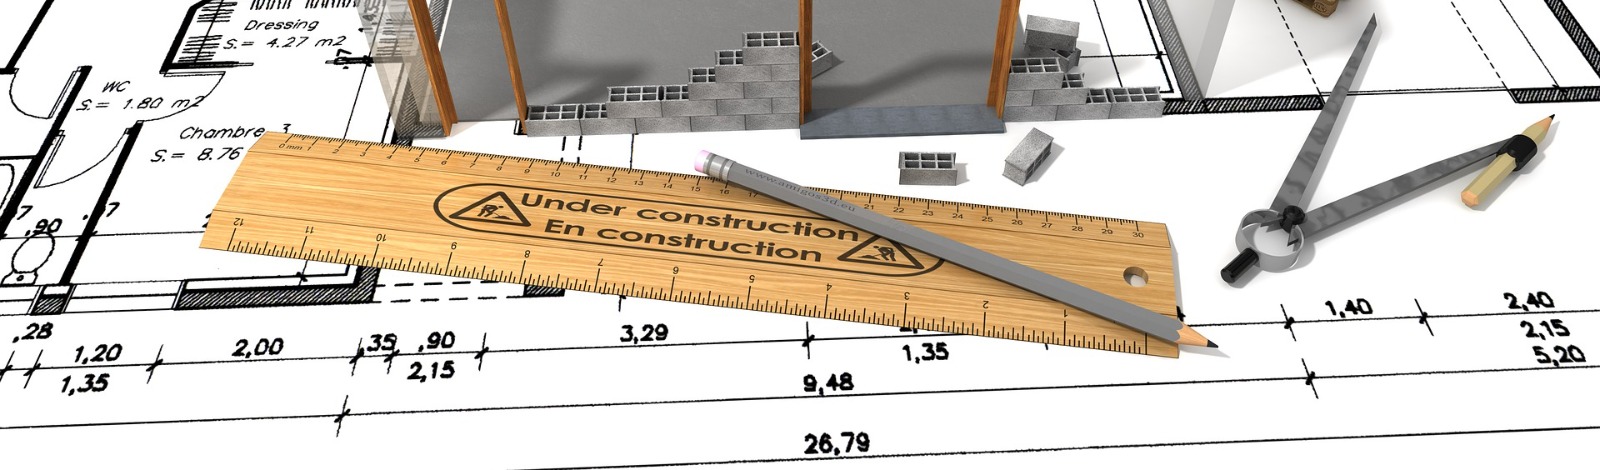 architectural drawings and a ruler